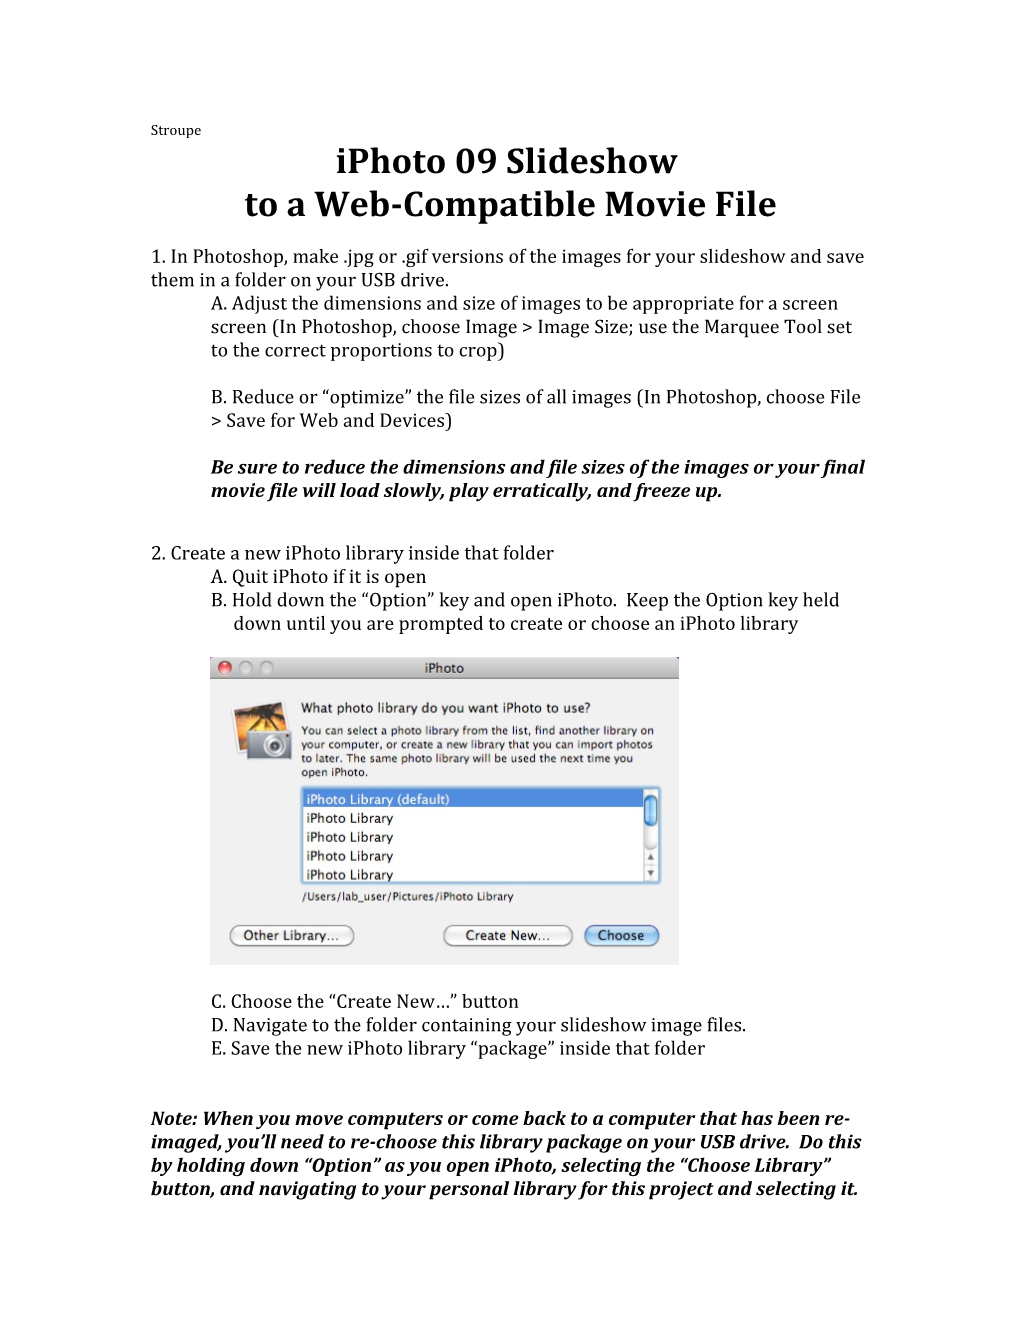 To a Web-Compatible Movie File